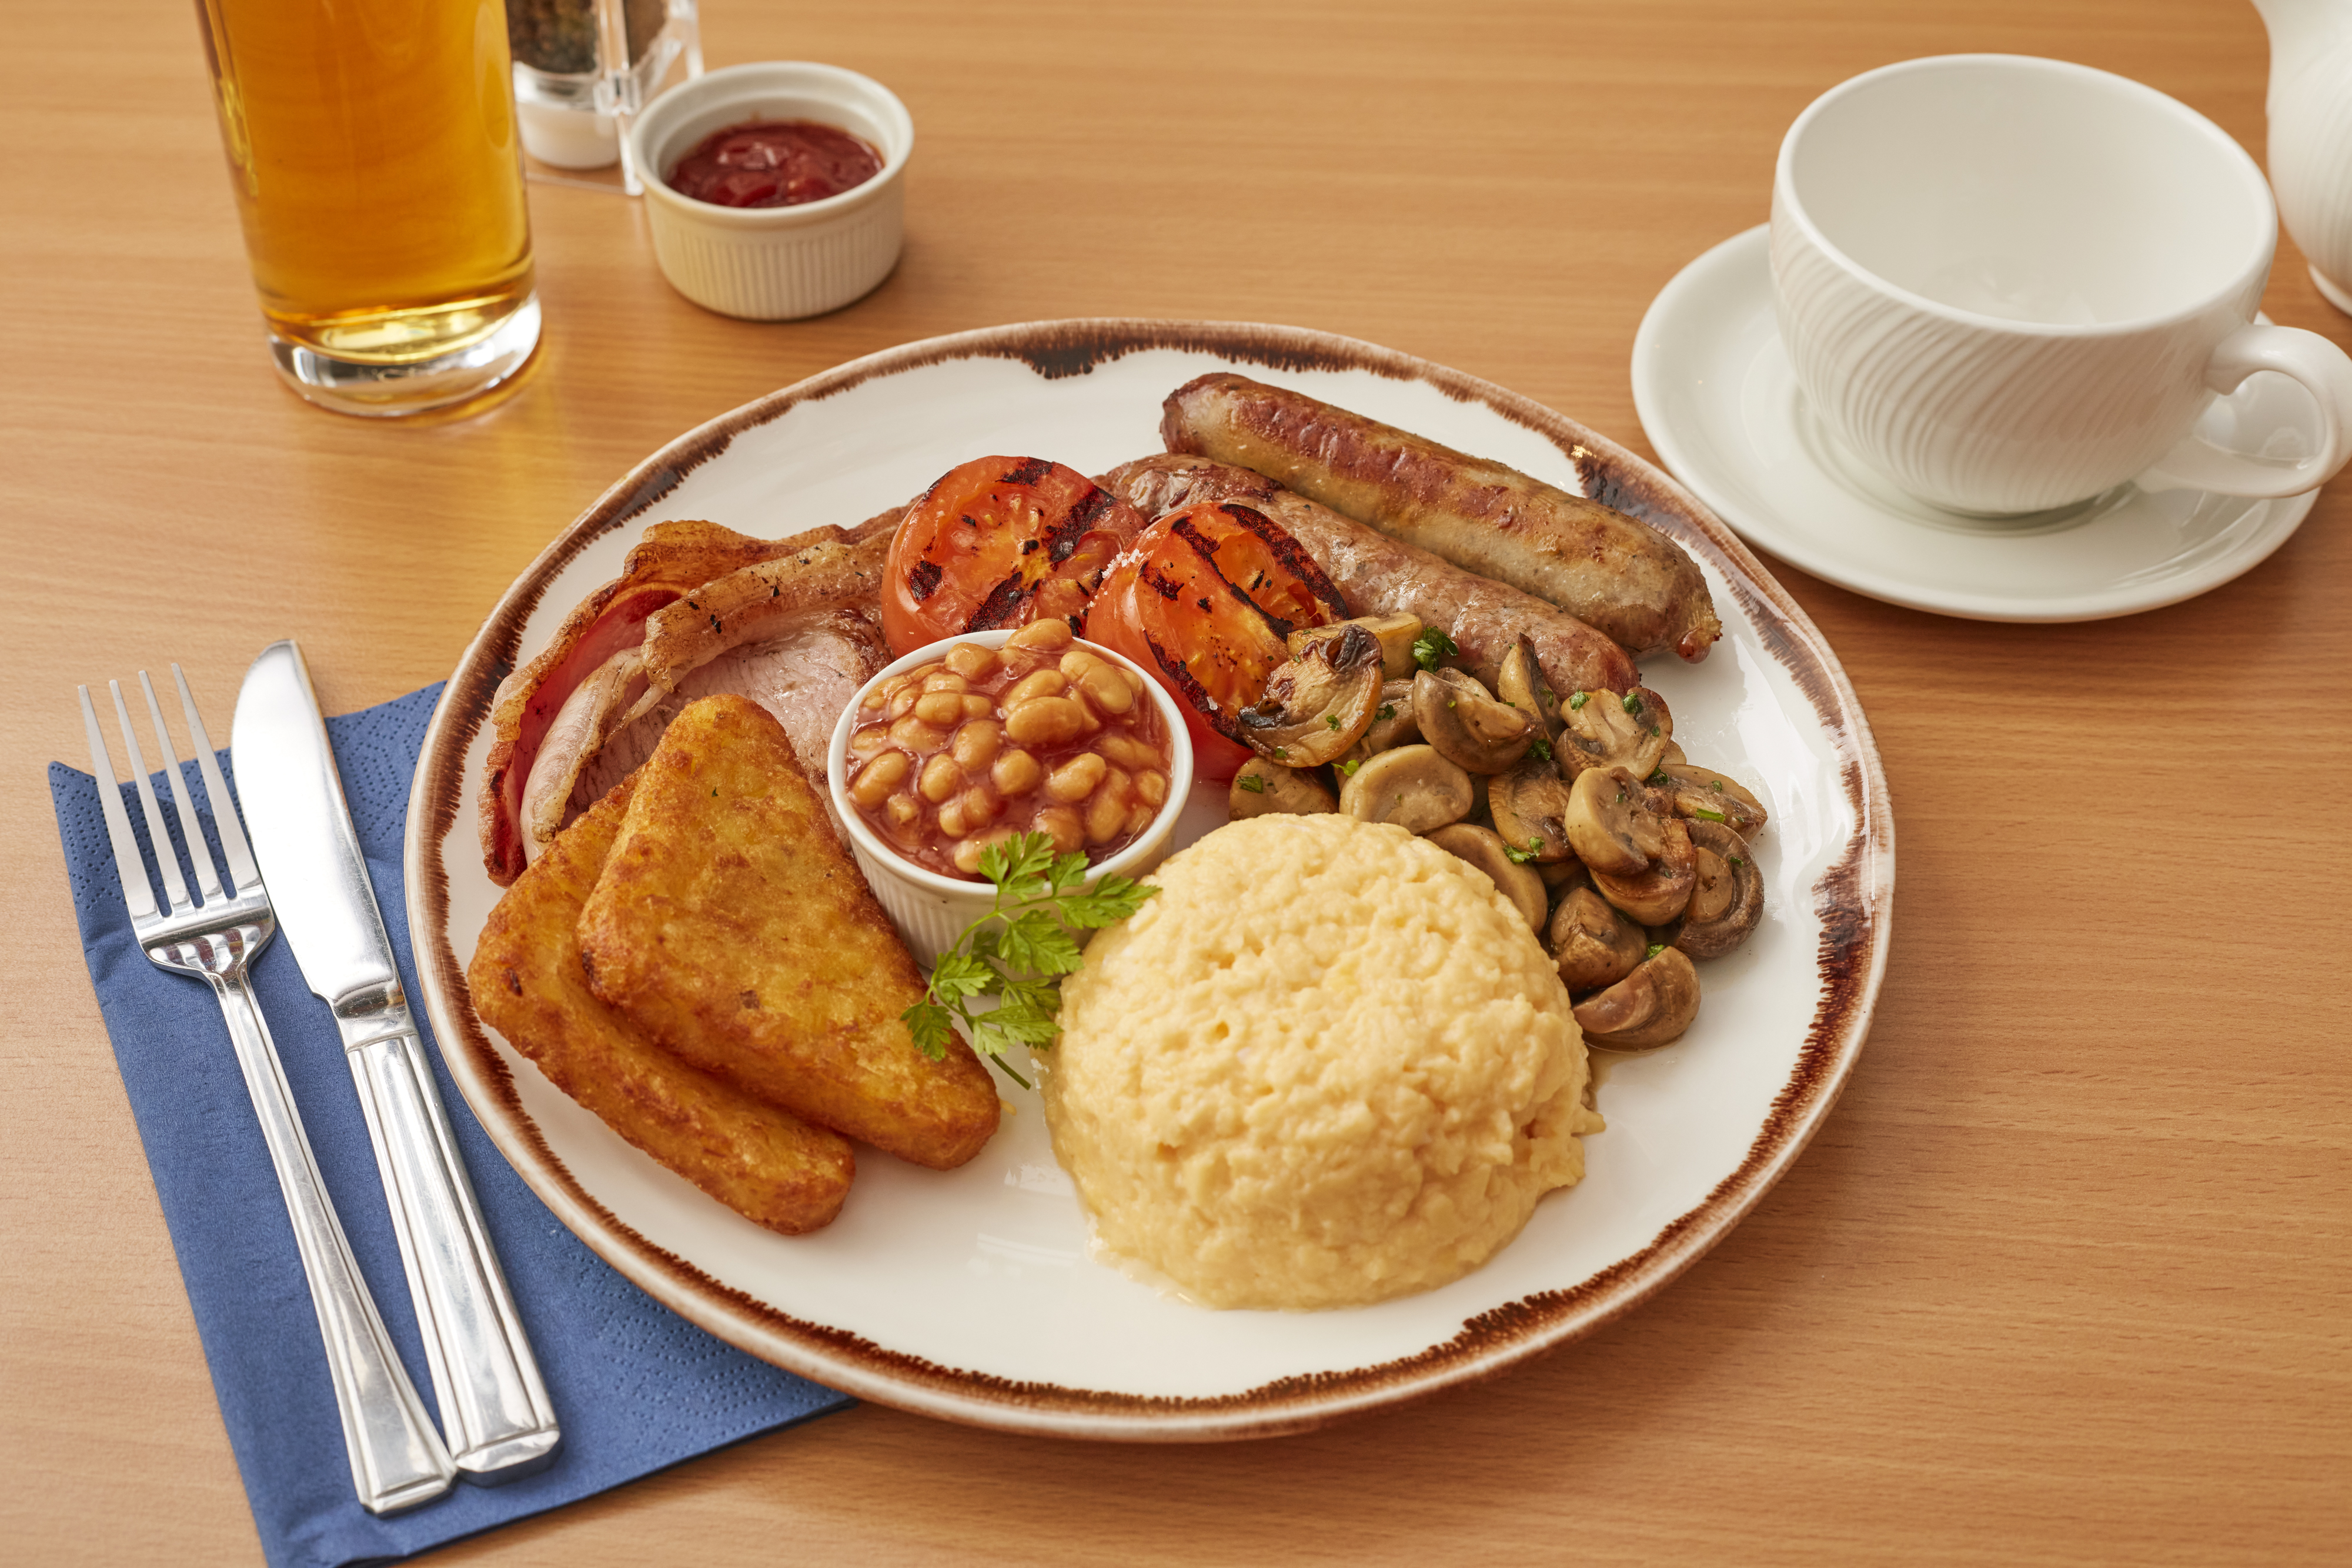 Breakfast at BRICKS Restaurant - Scrambled Egg, Hash Browns, Baked Beans, Sausages, Bacon, Mushrooms and Grilled Tomato